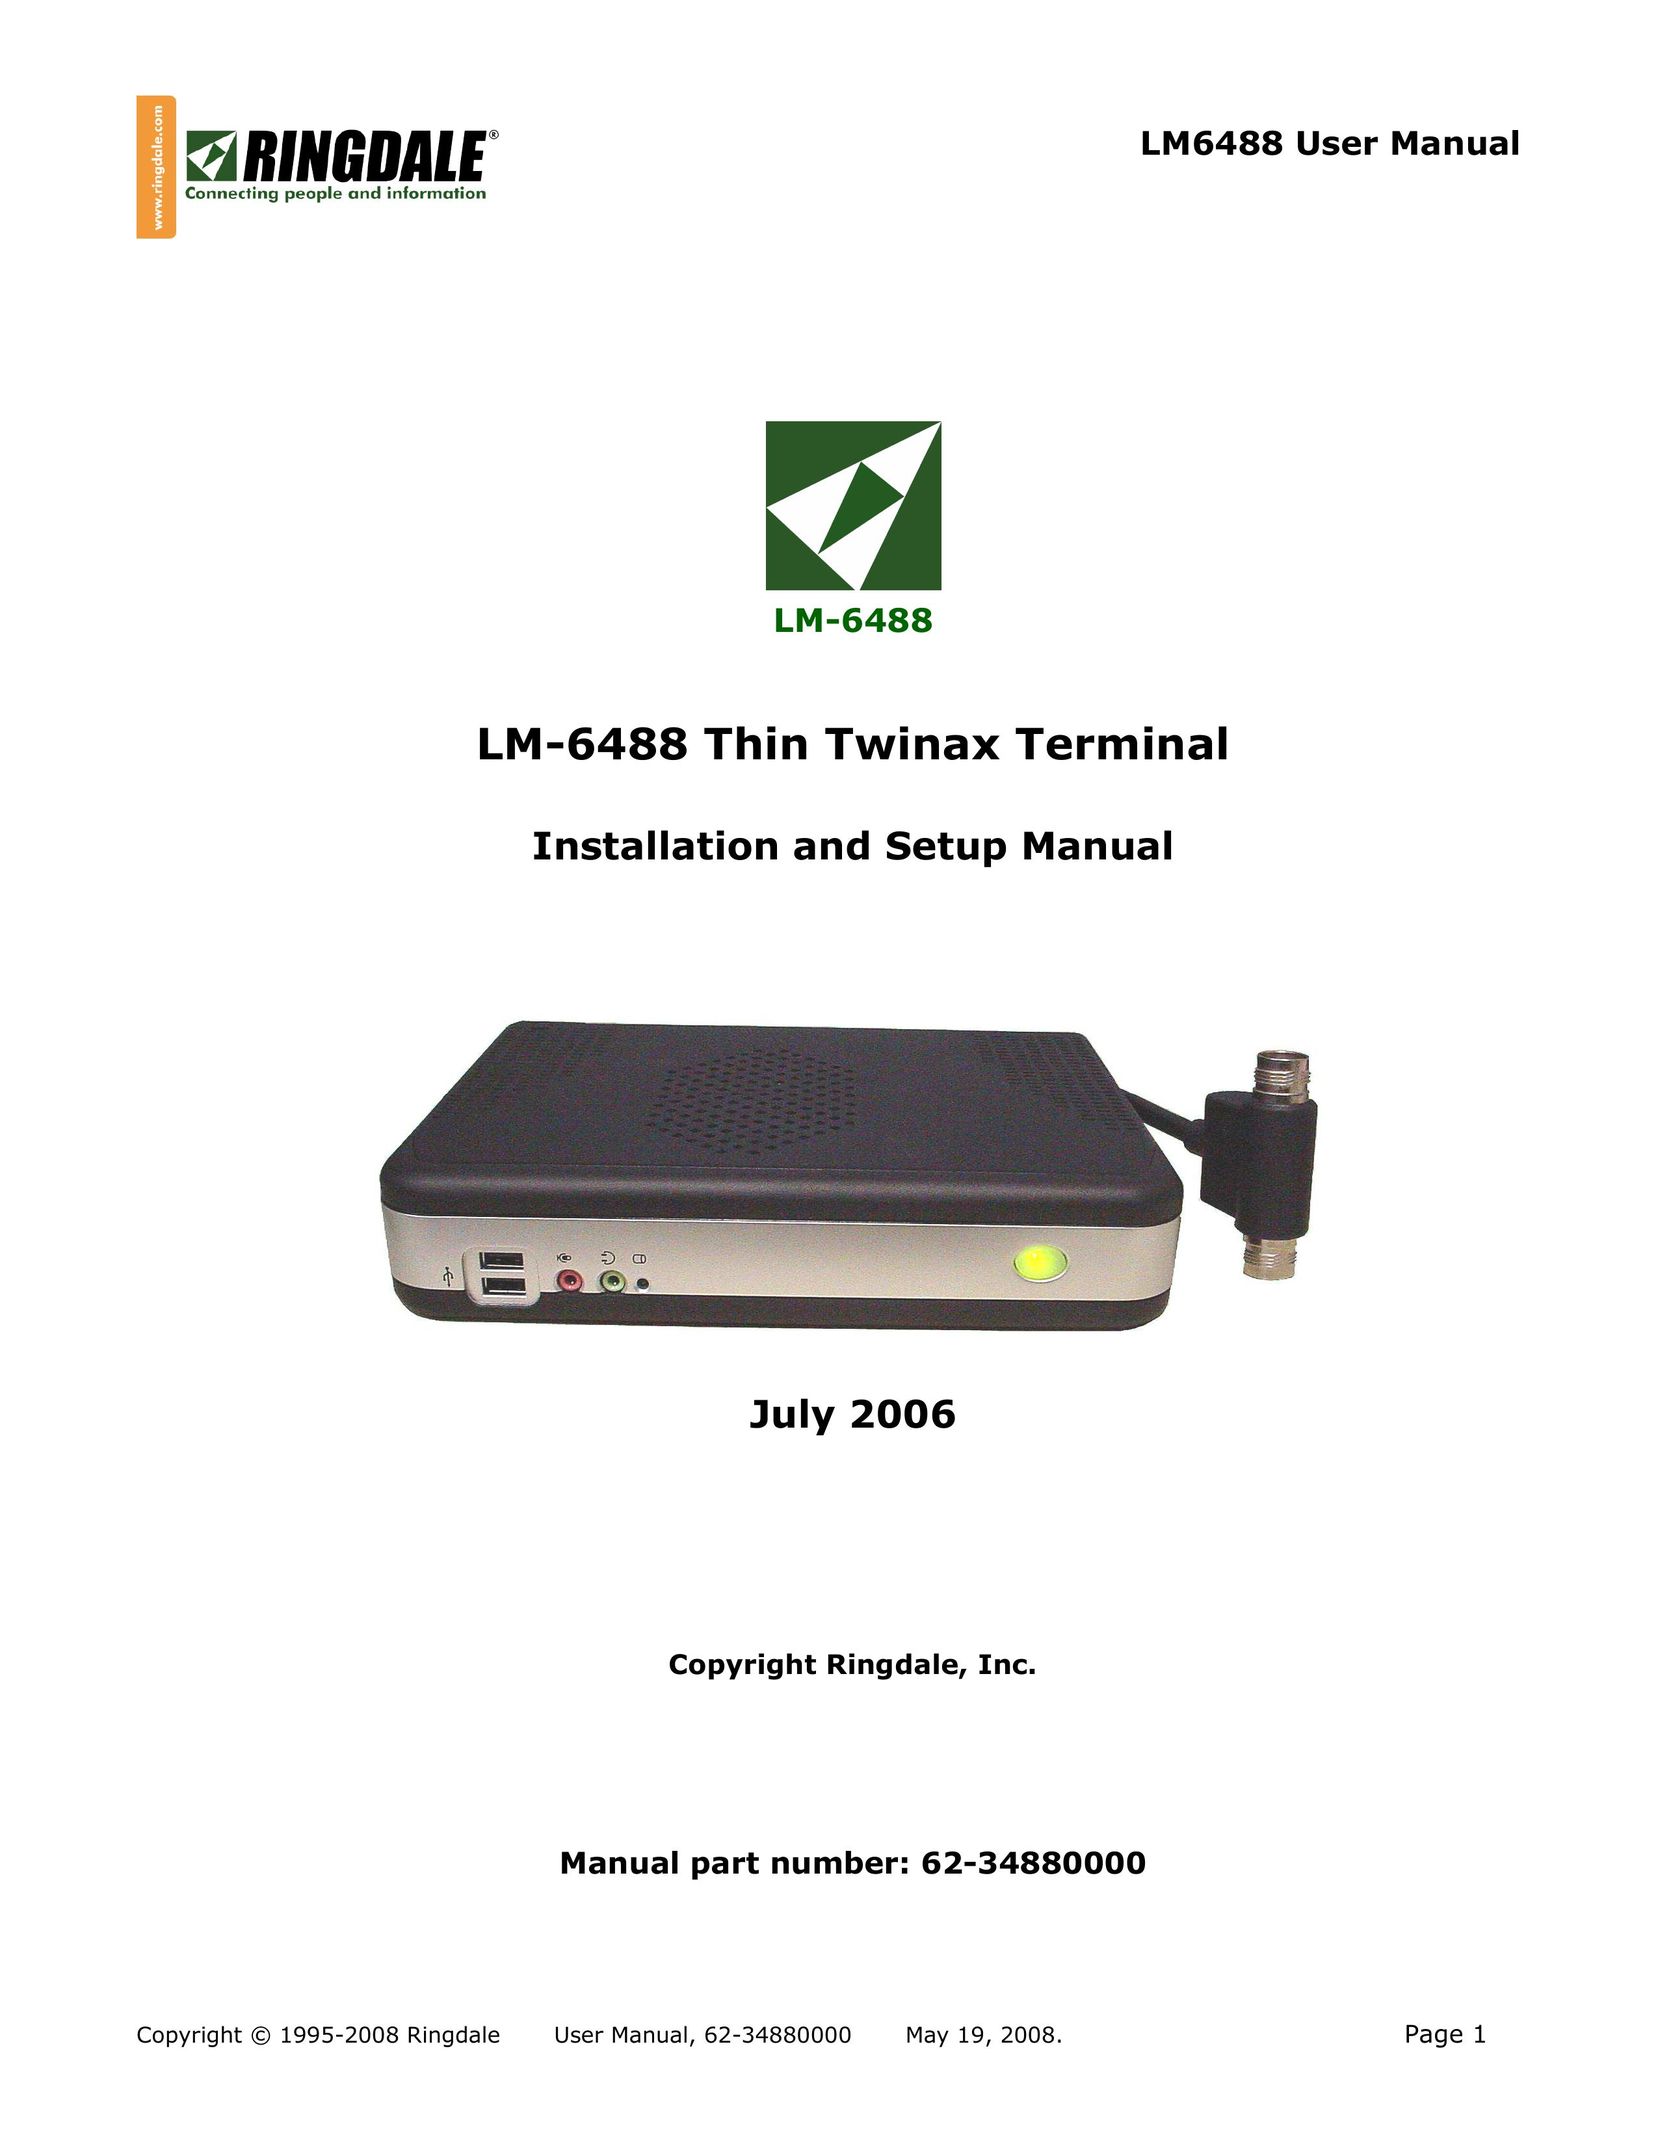 Ringdale LM-6488 Network Router User Manual